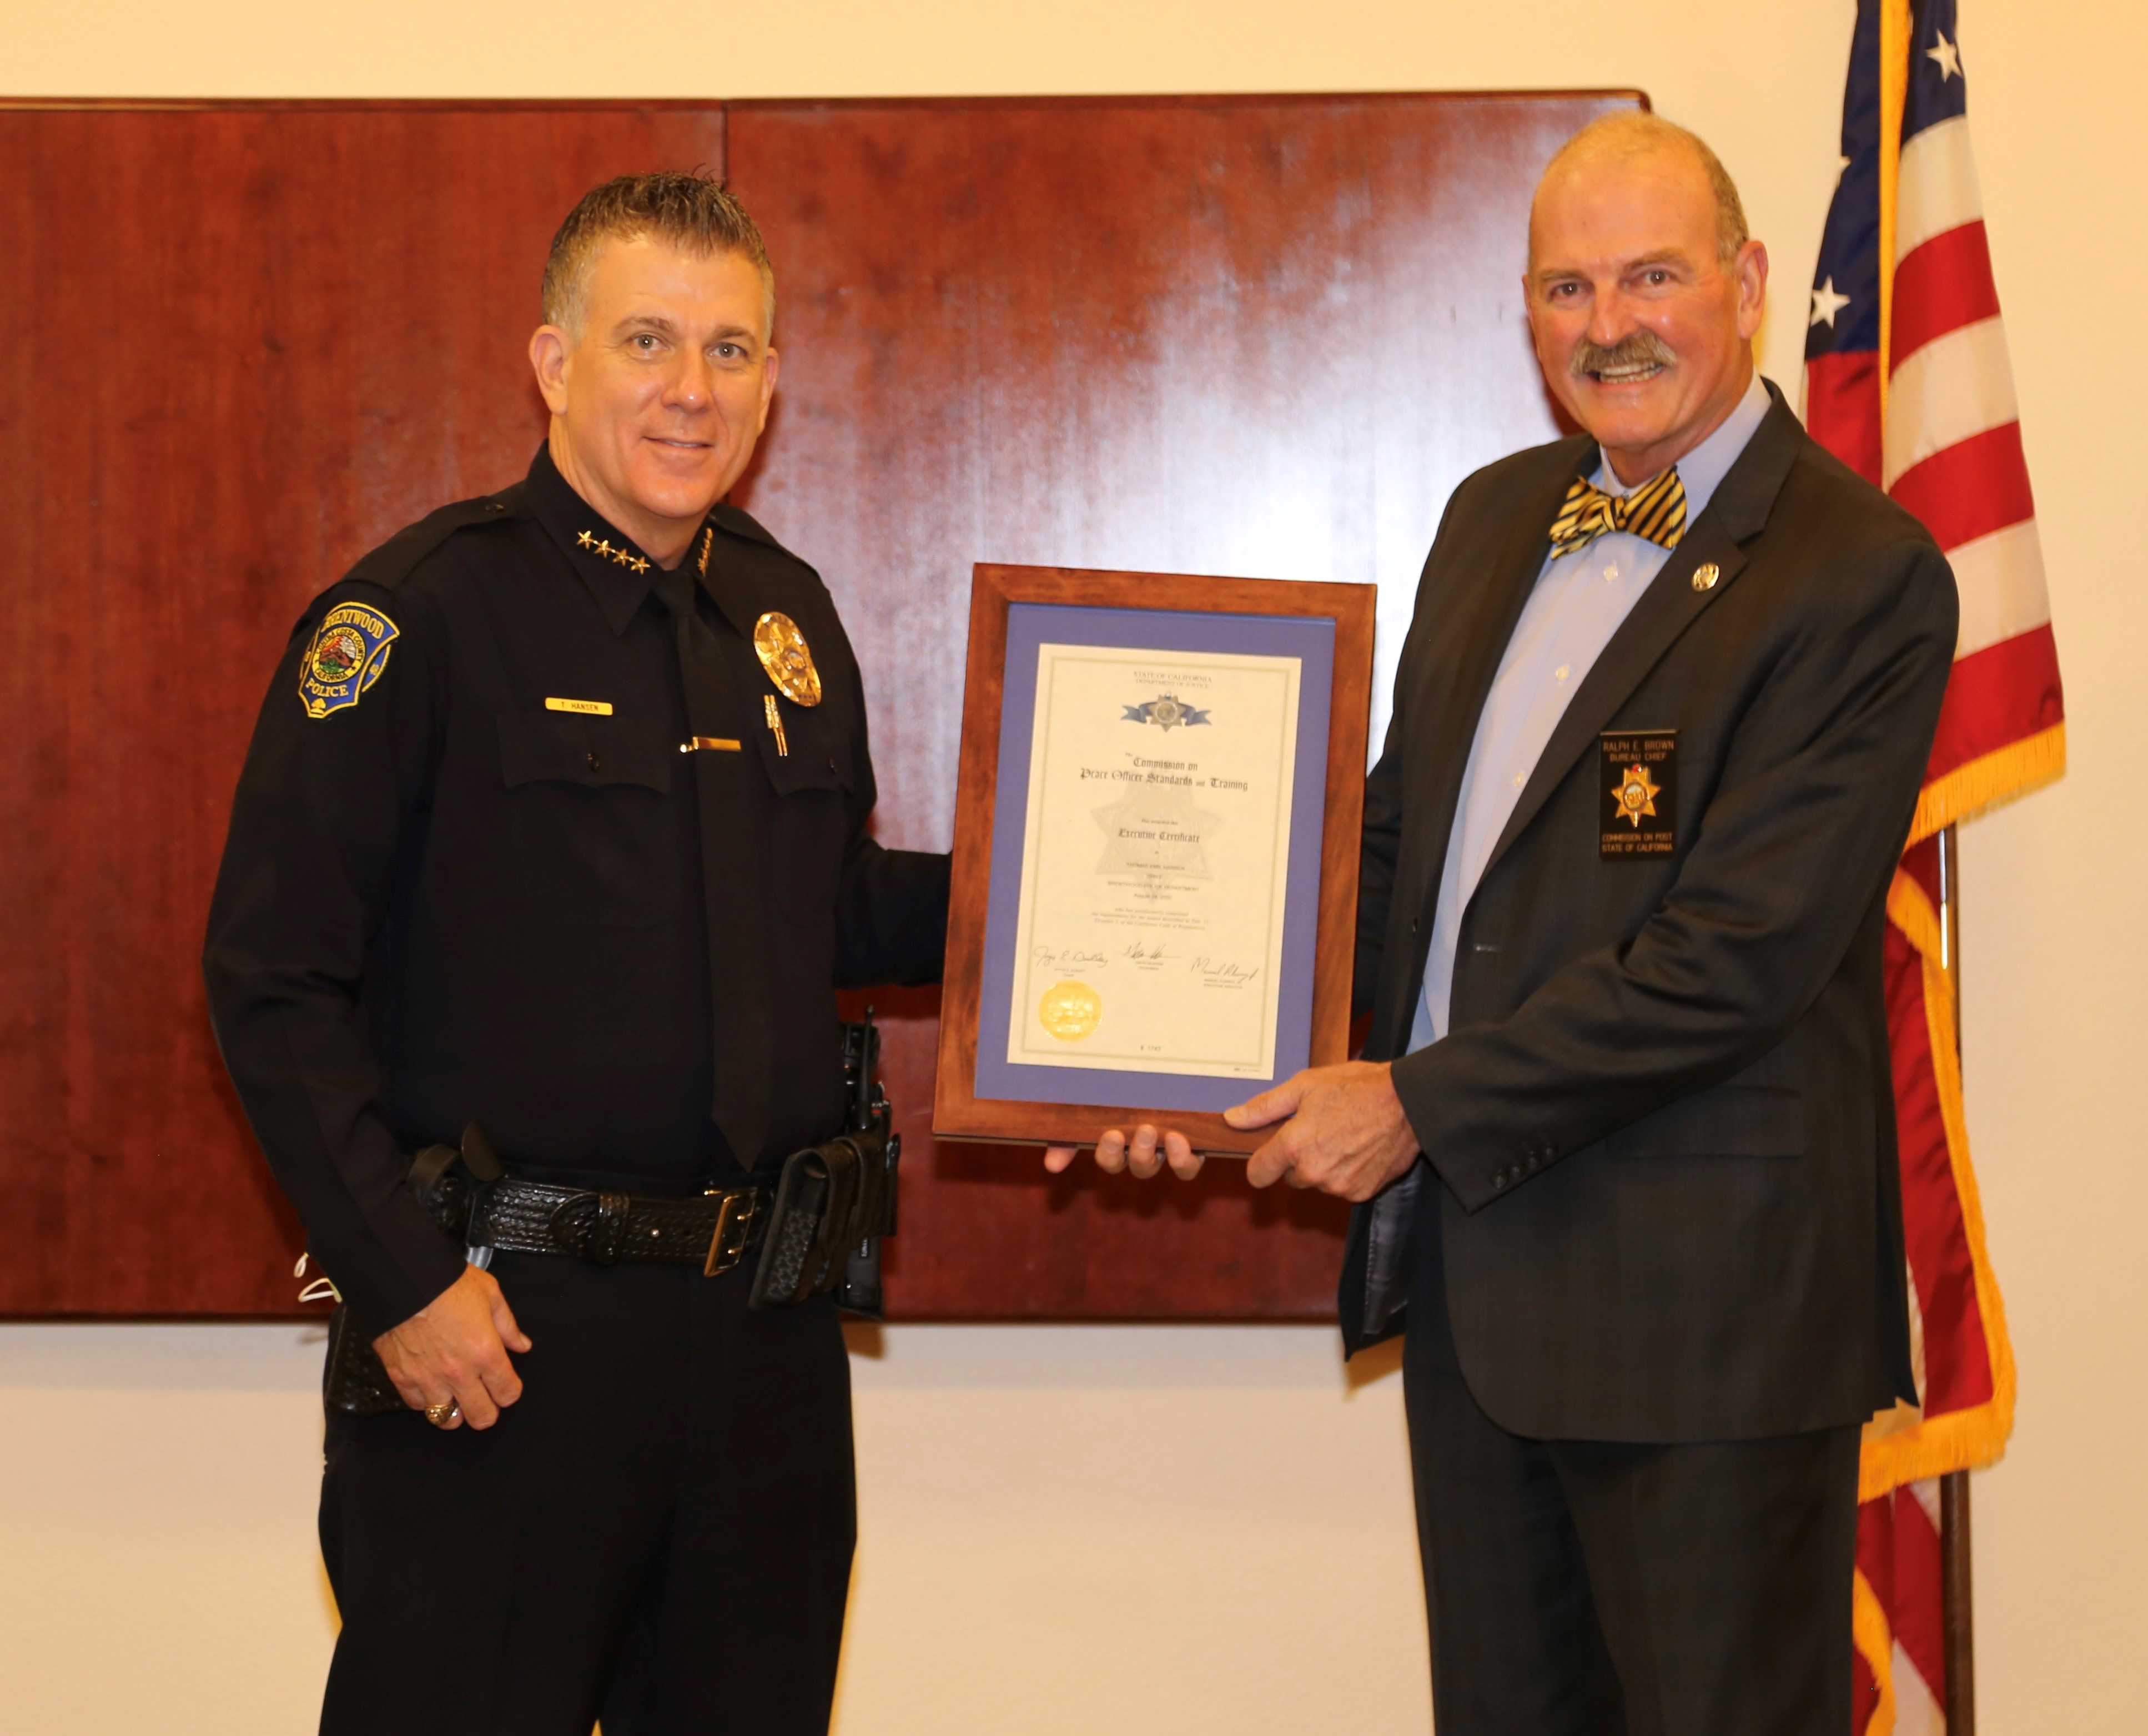 Chief Tom Hansen, Brentwood PD receives the Executive Certificate